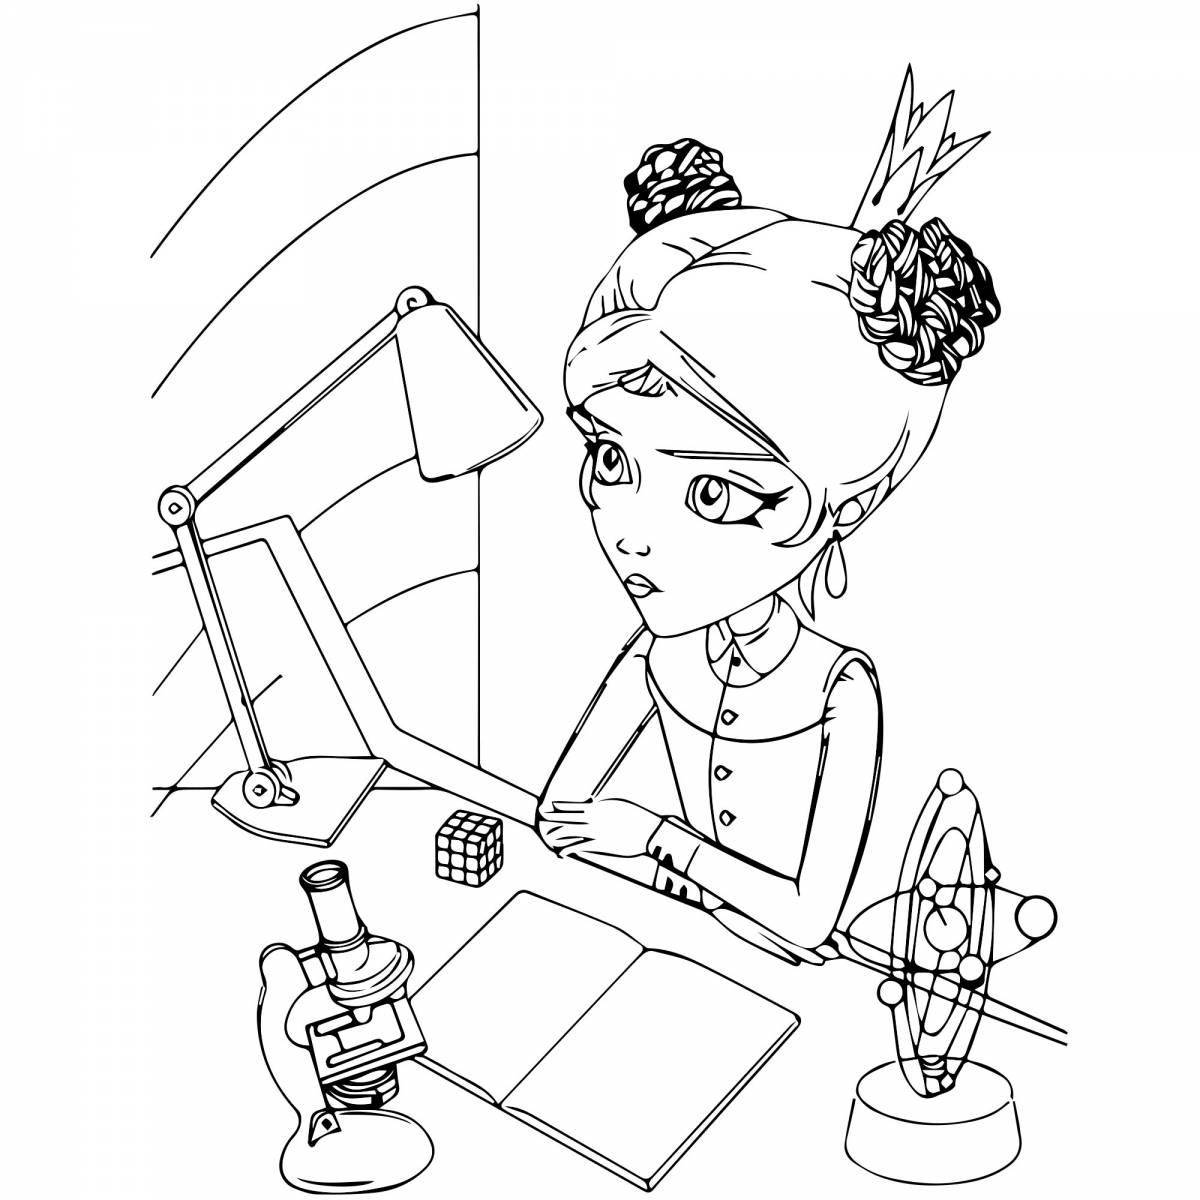 Charming princesses are preparing coloring pages